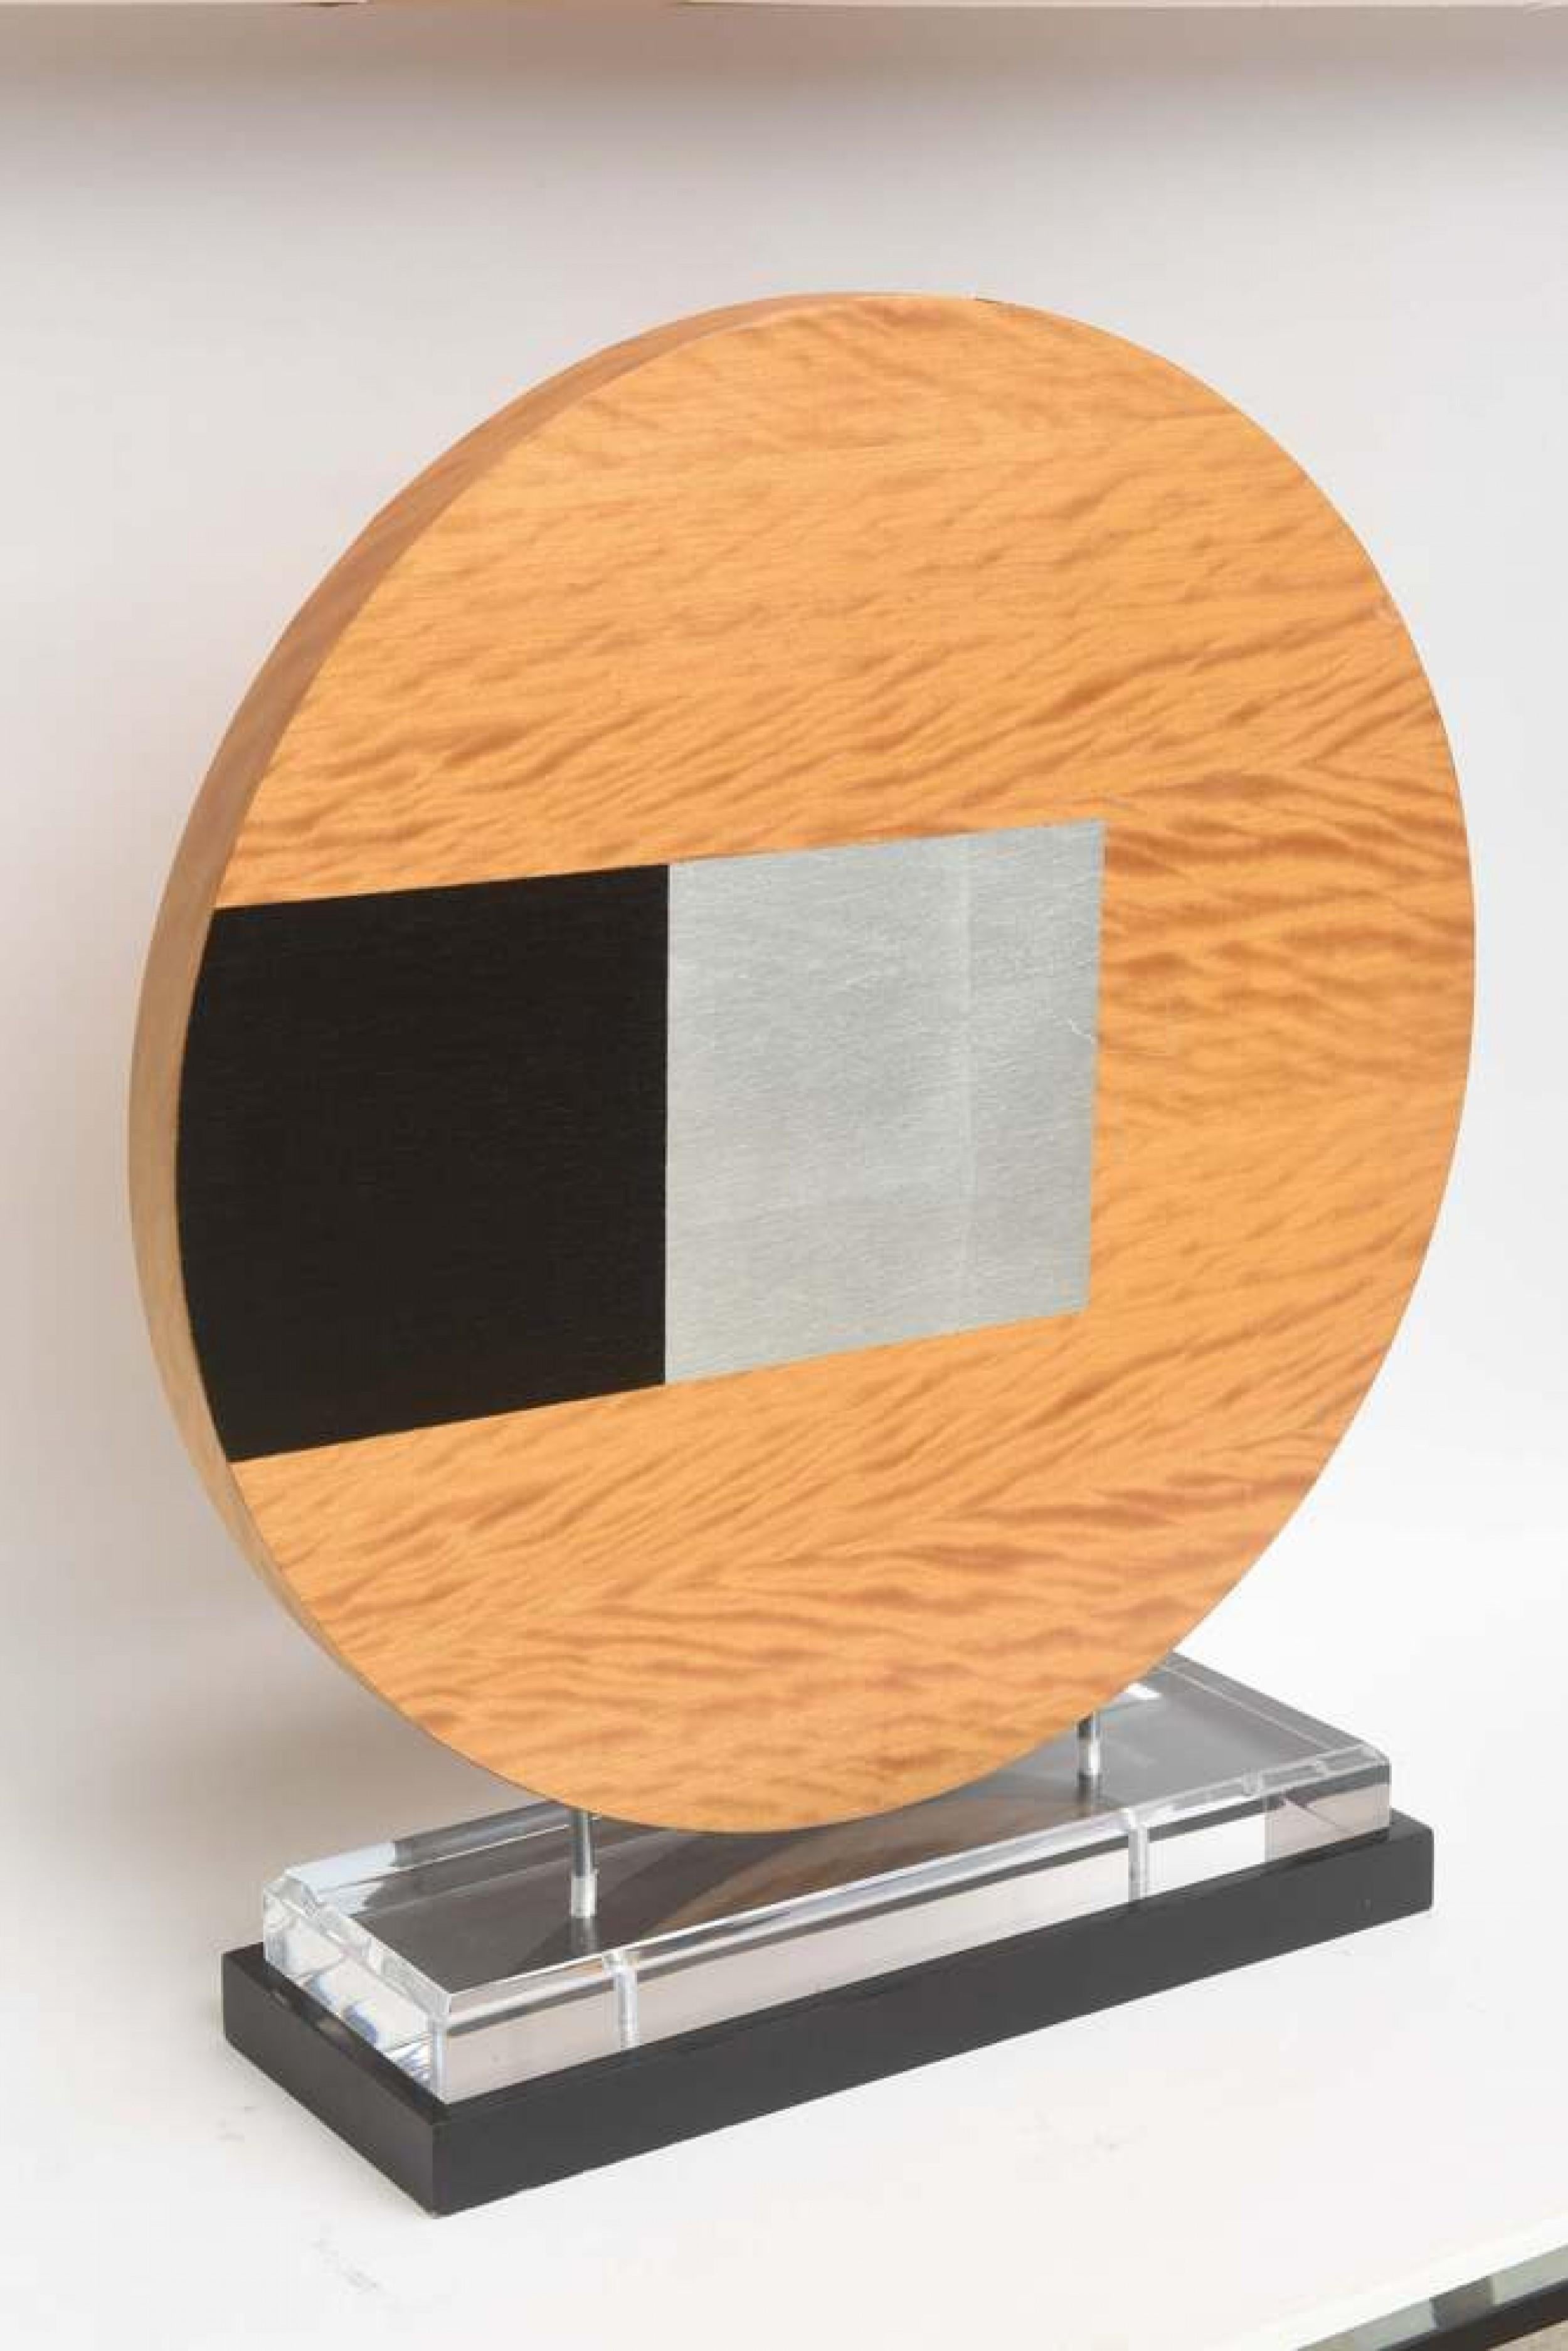 Contemporary American abstract sculpture featuring a wooden desk with geometric black and gray designs, mounted on a rectangular base.